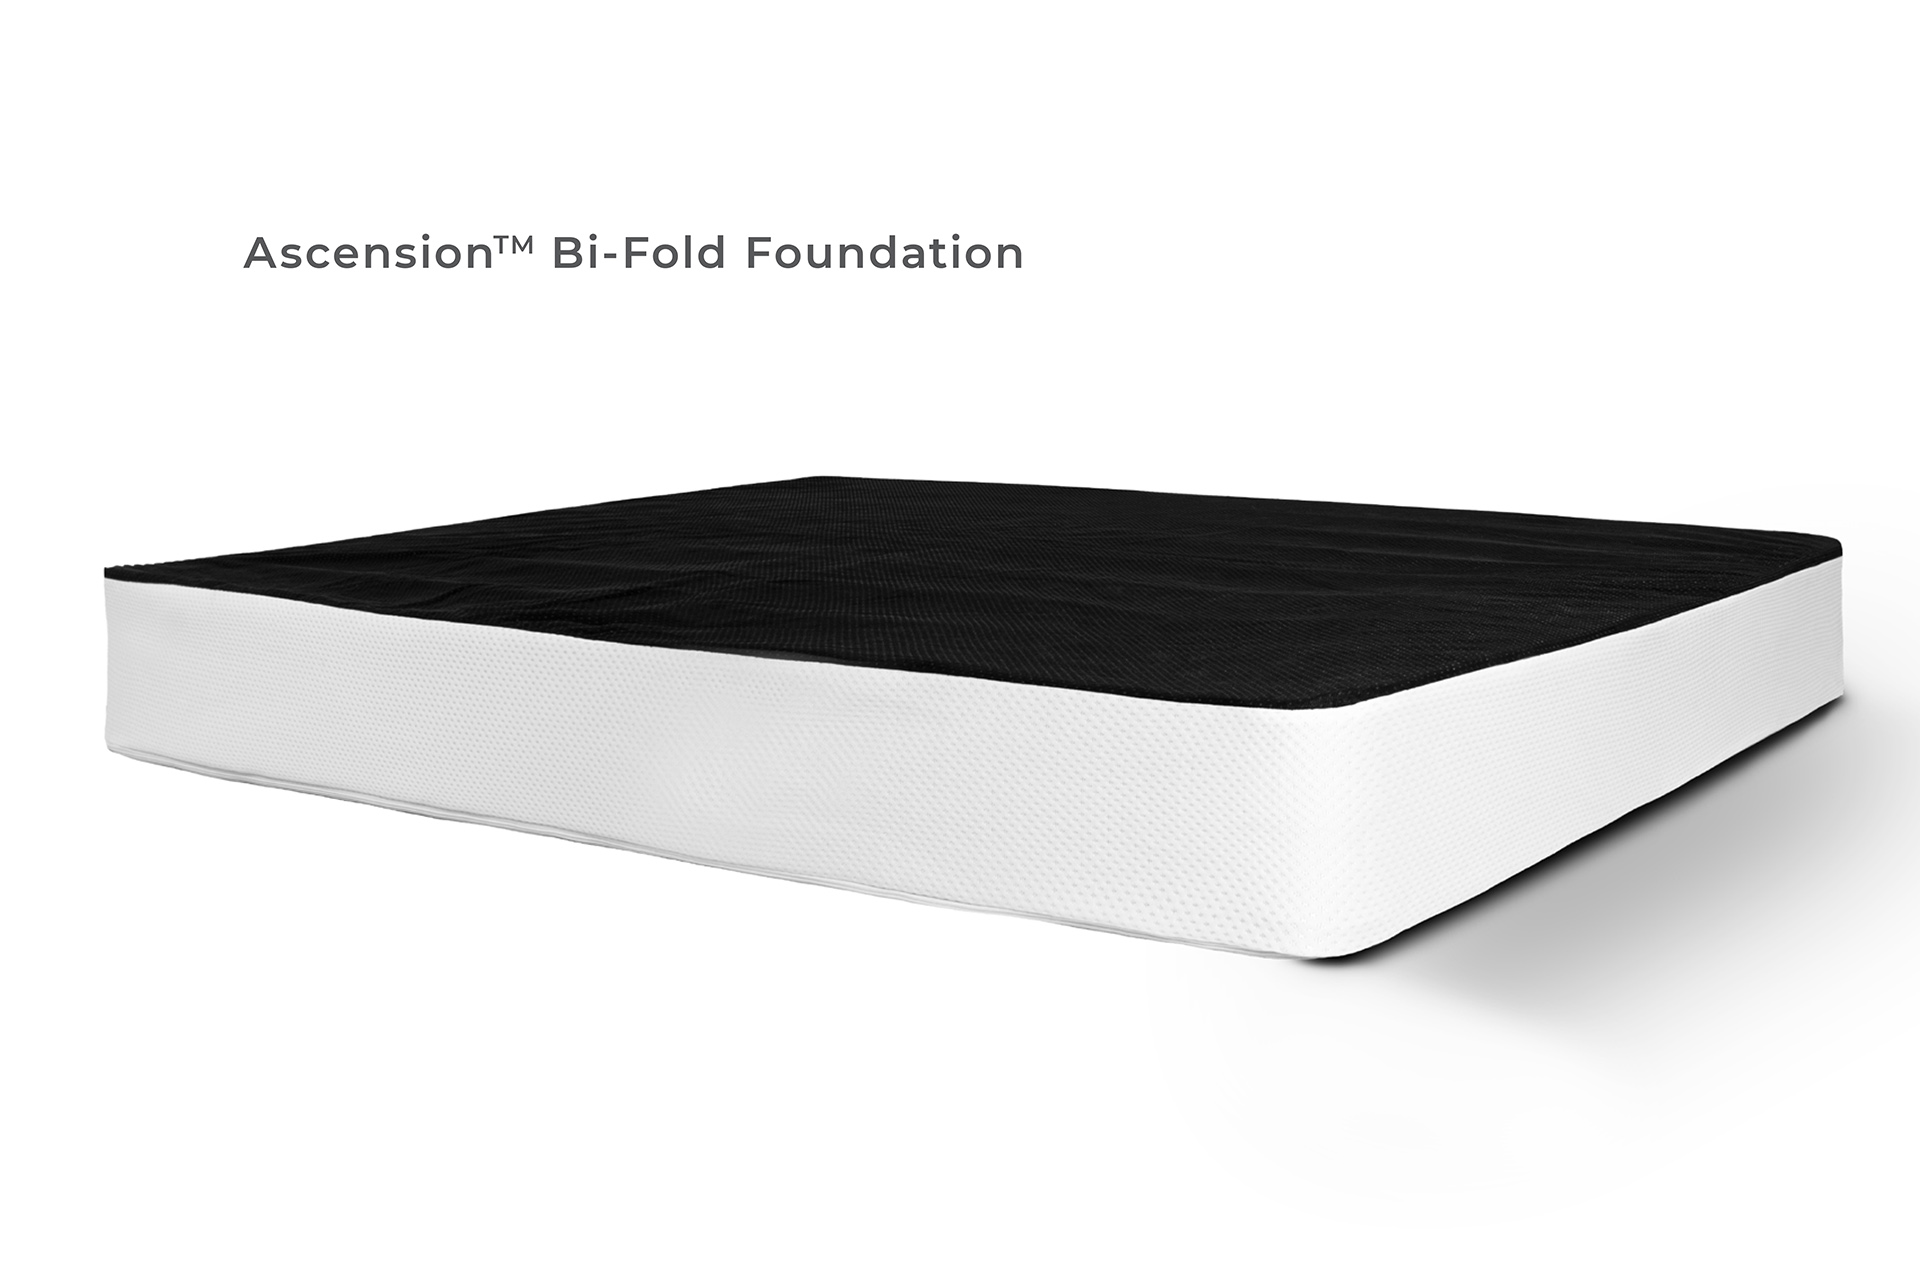 Ascension Bi-Fold Foundation – Mattress King Inc. is Carson City Nevada's  only locally owned mattress store offering financing, deep discounts &  savings!